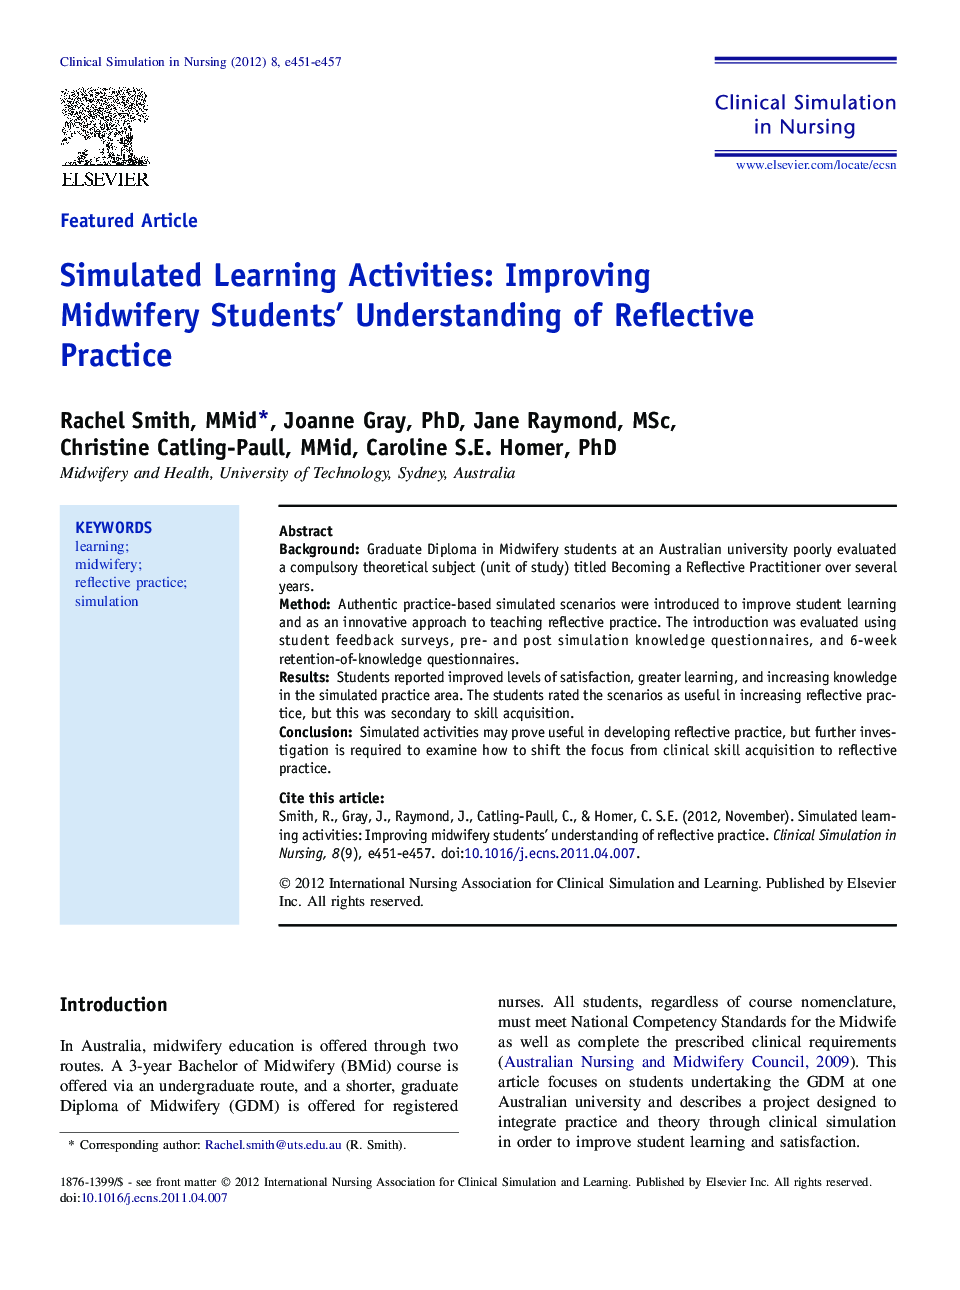 Simulated Learning Activities: Improving Midwifery Students' Understanding of Reflective Practice